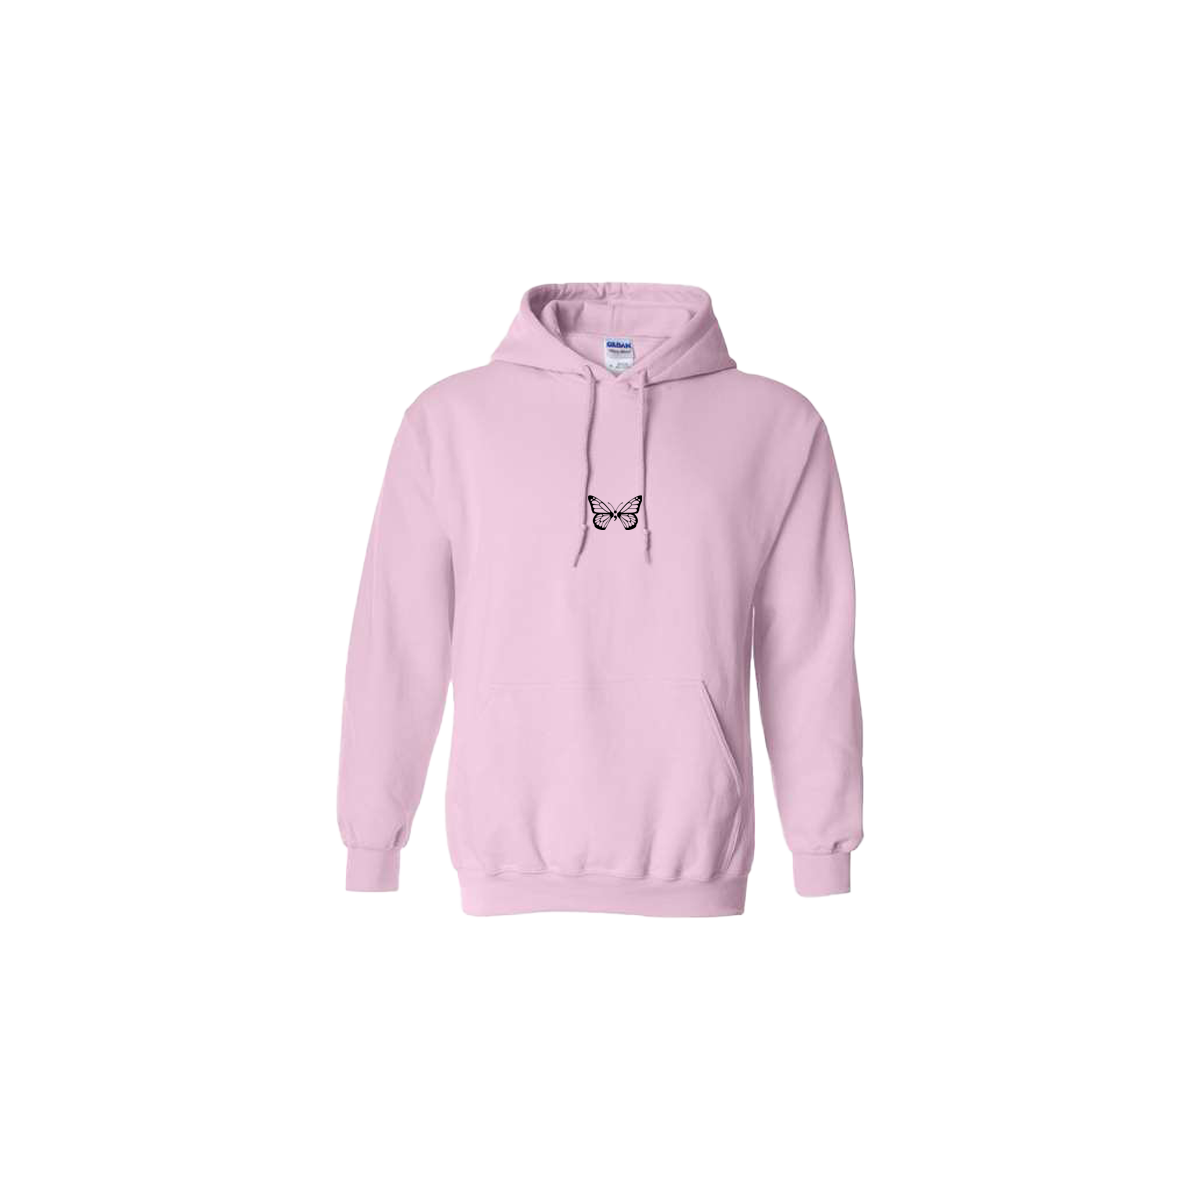 Butterfly Embroidered Light Pink Hoodie - Mental Health Awareness Clothing